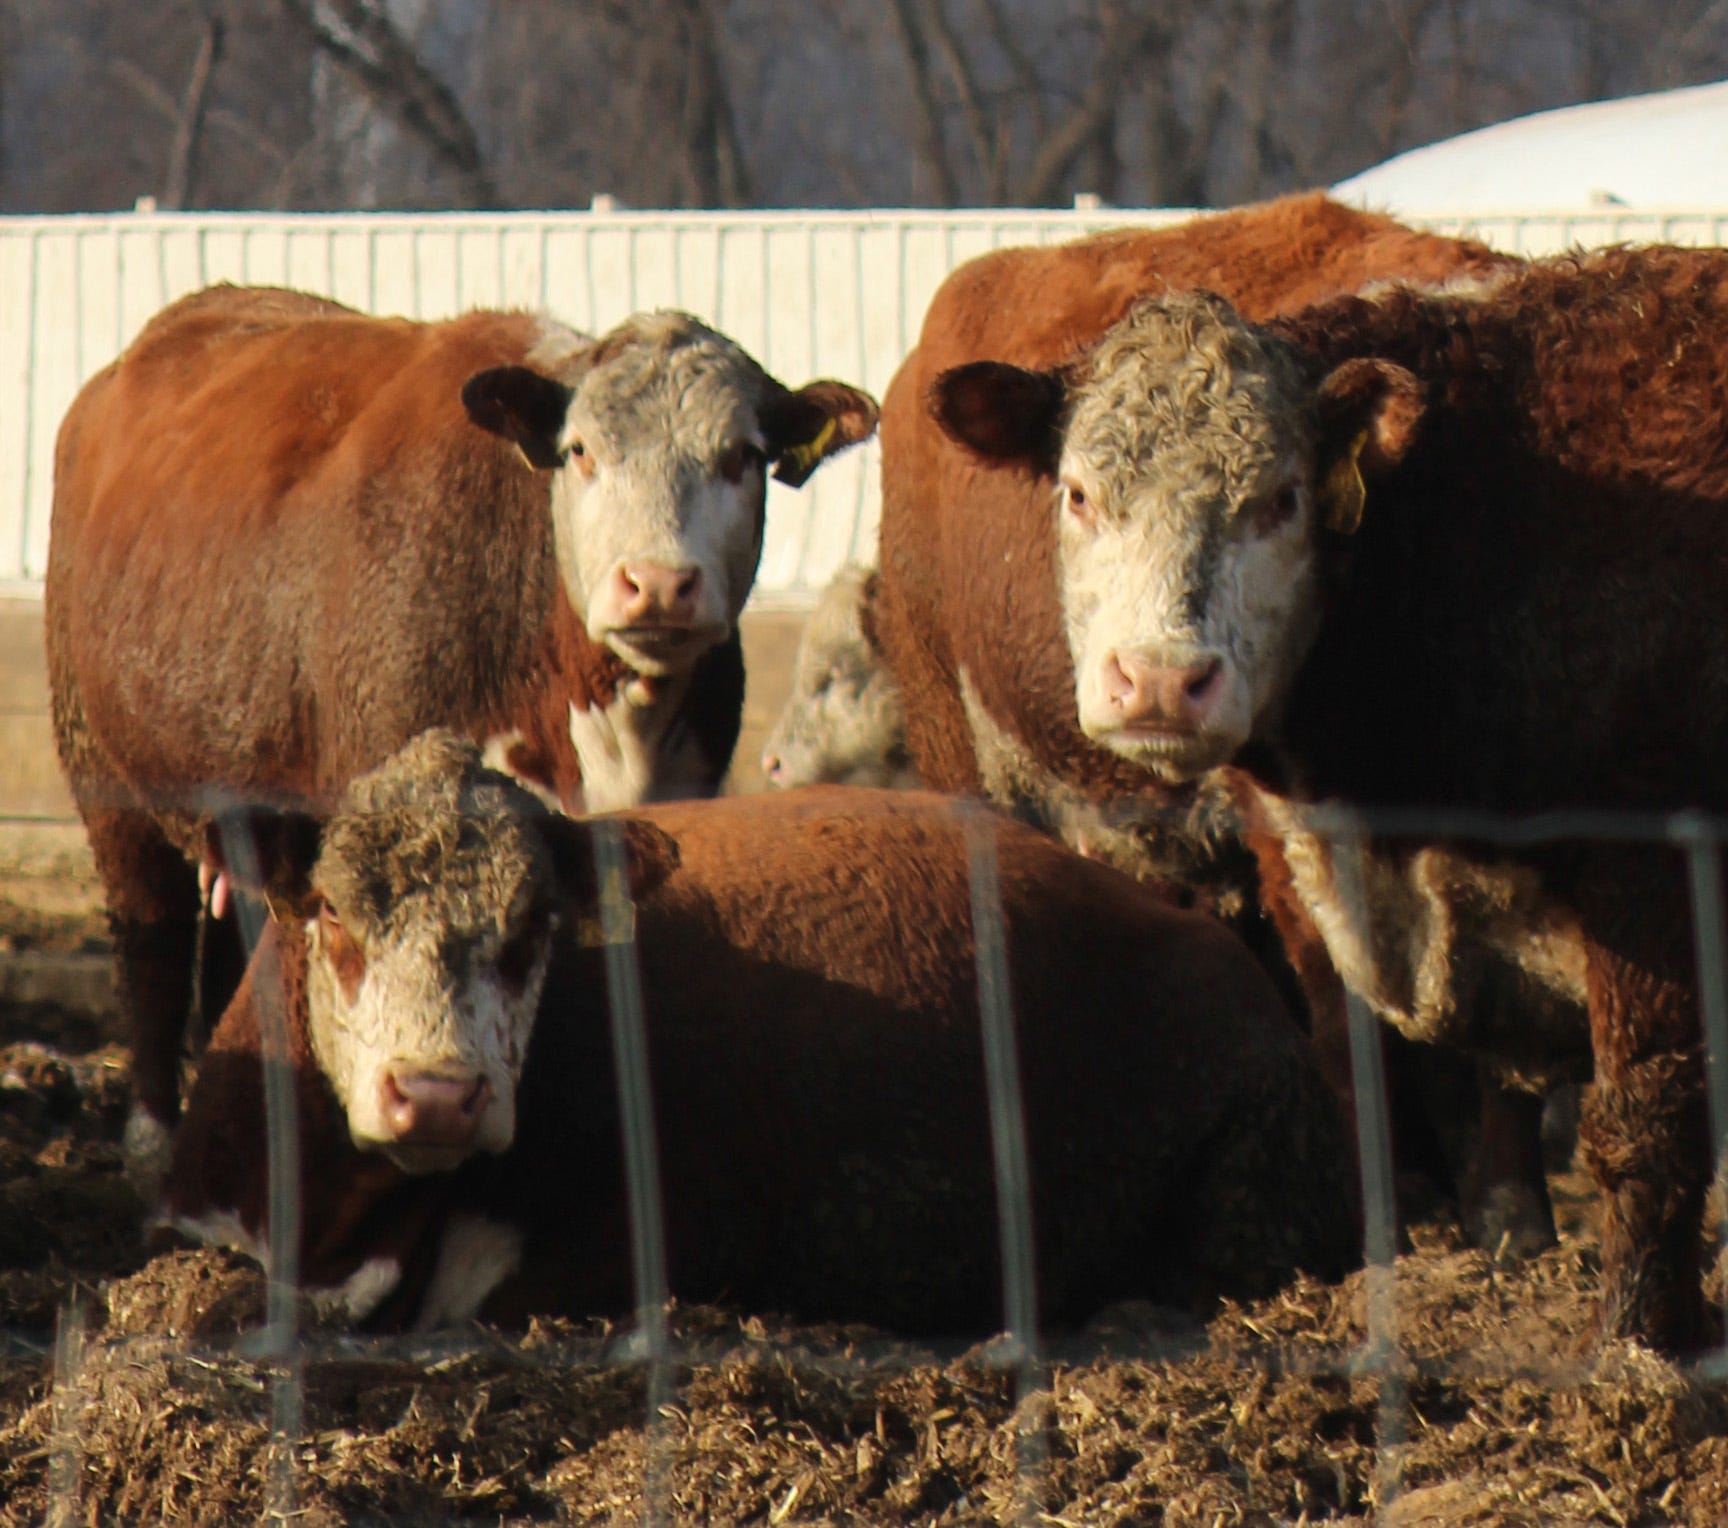 Nation's cattle numbers lowest since 1951. What does that mean for farmers and consumers?